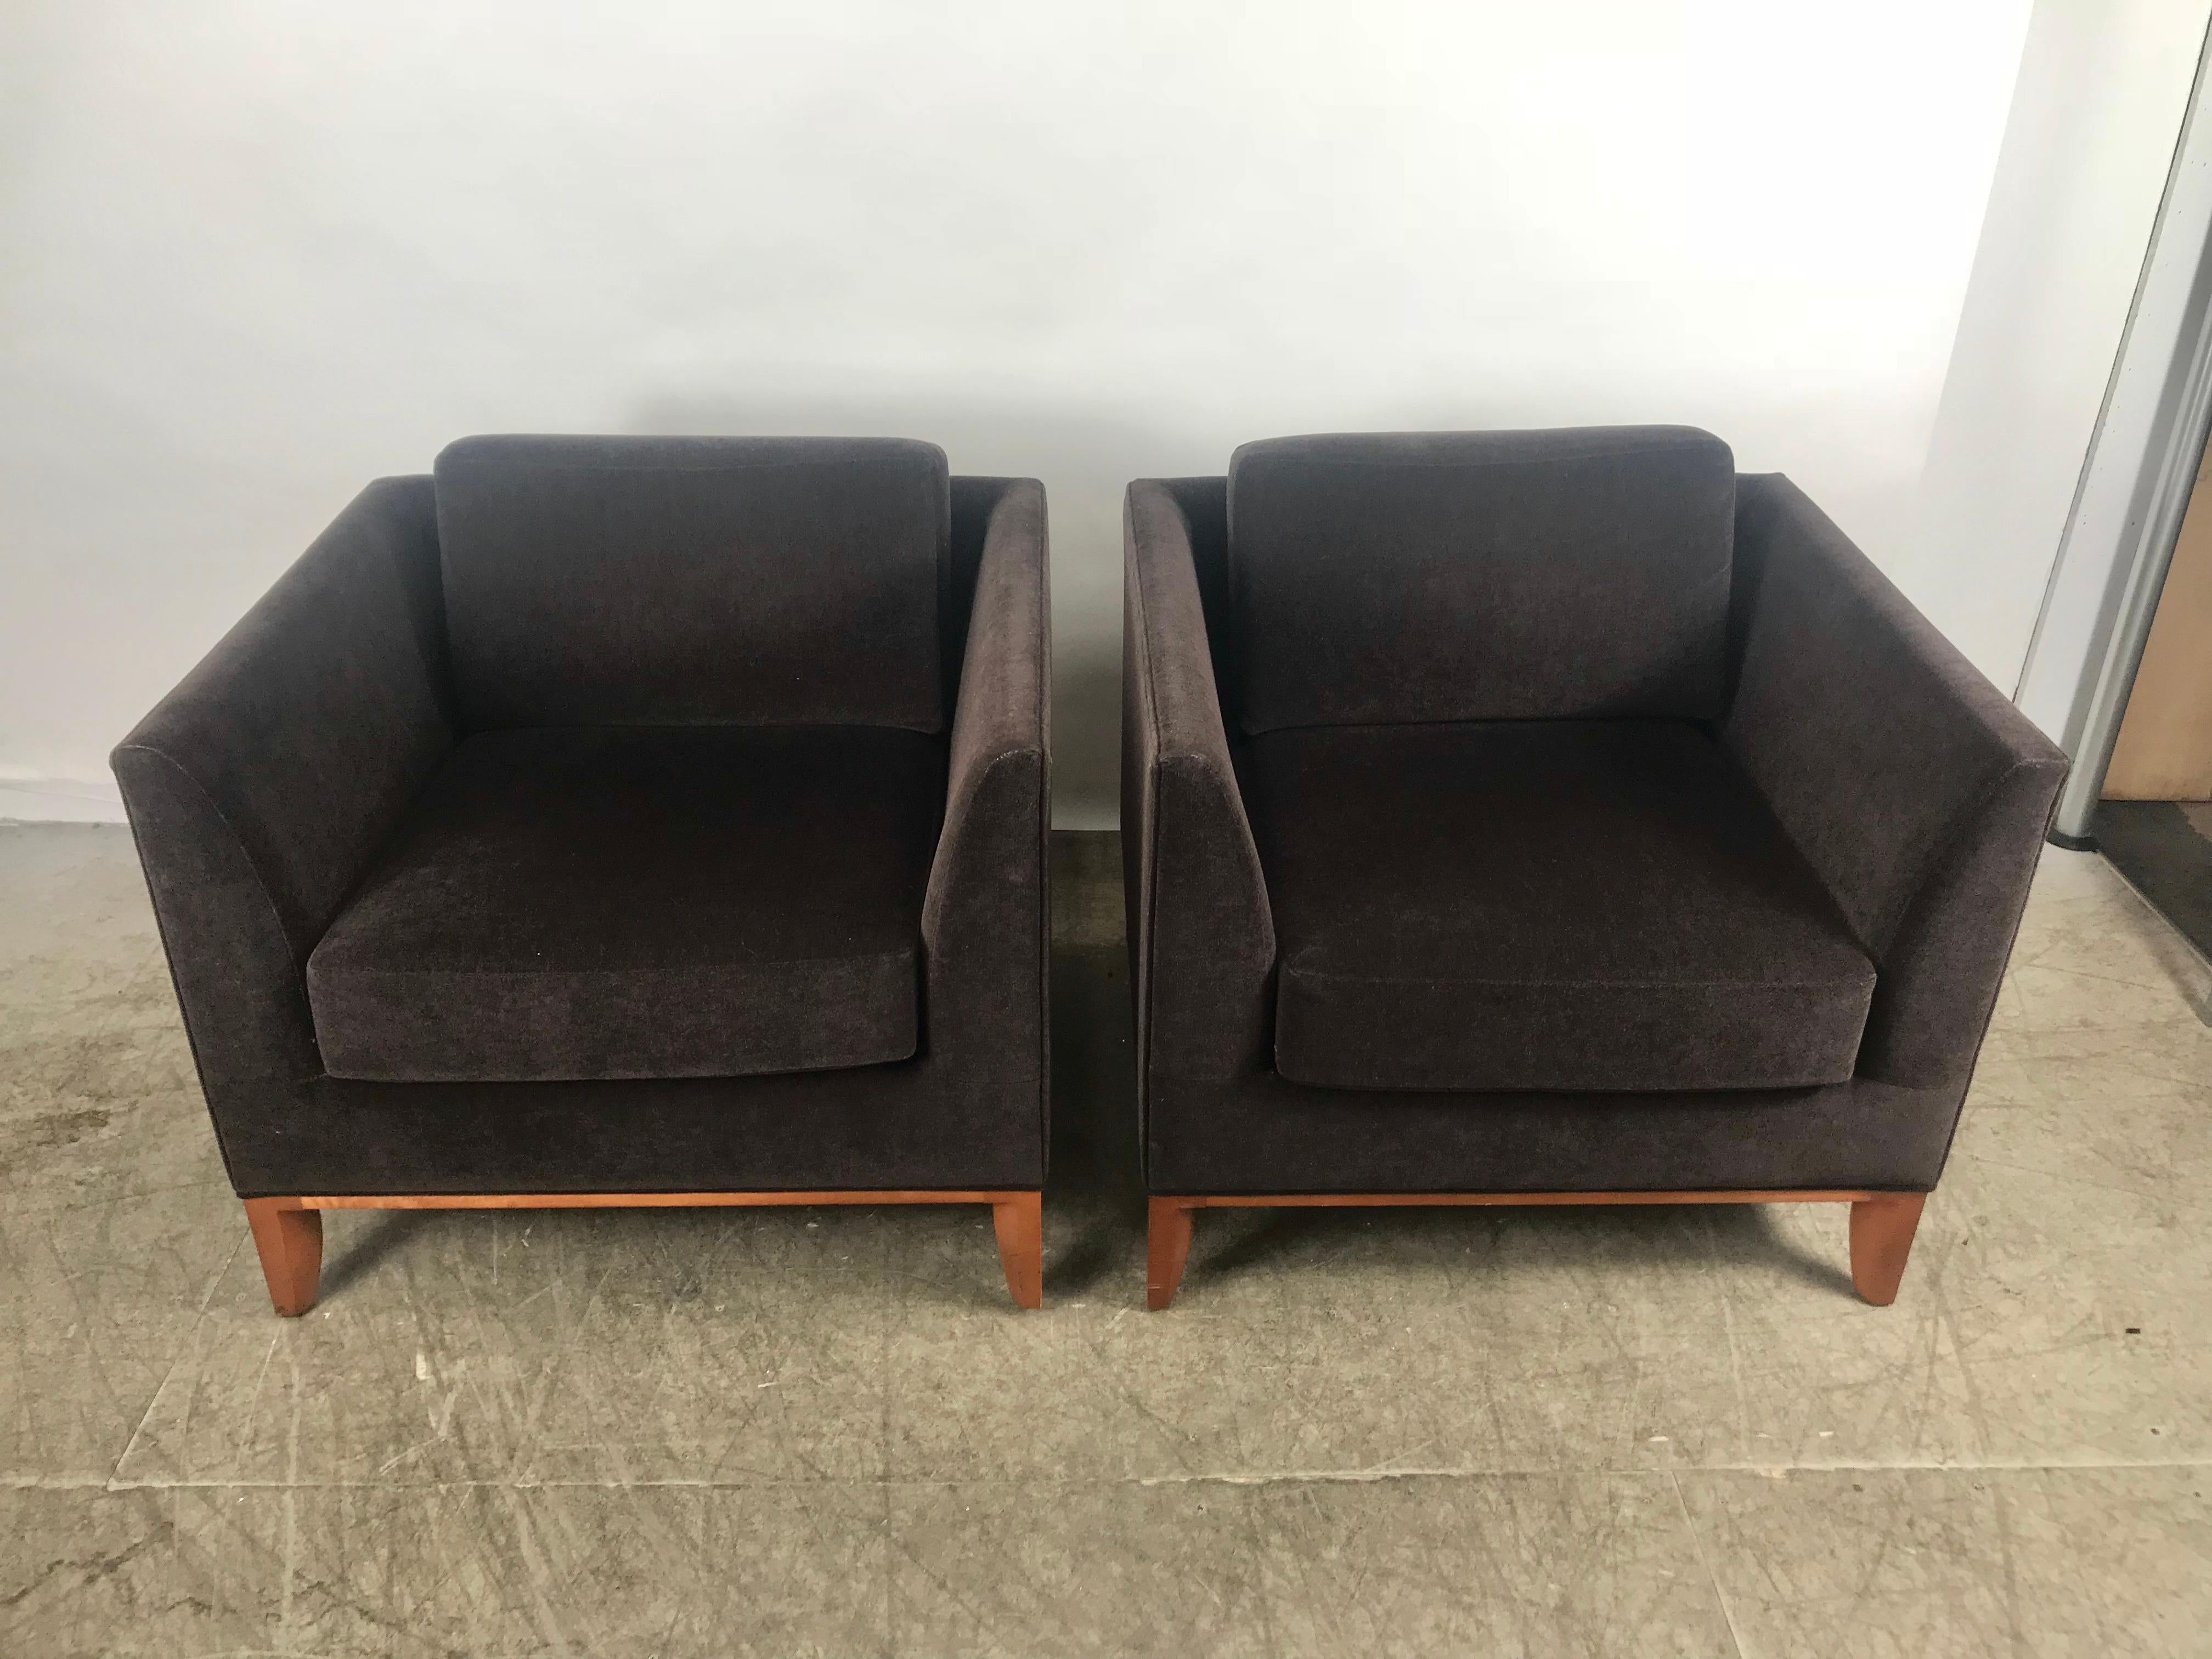 Art Deco Stunning Pair of Mohair Contemporary Cube Lounge Chairs, Rembrandt Design